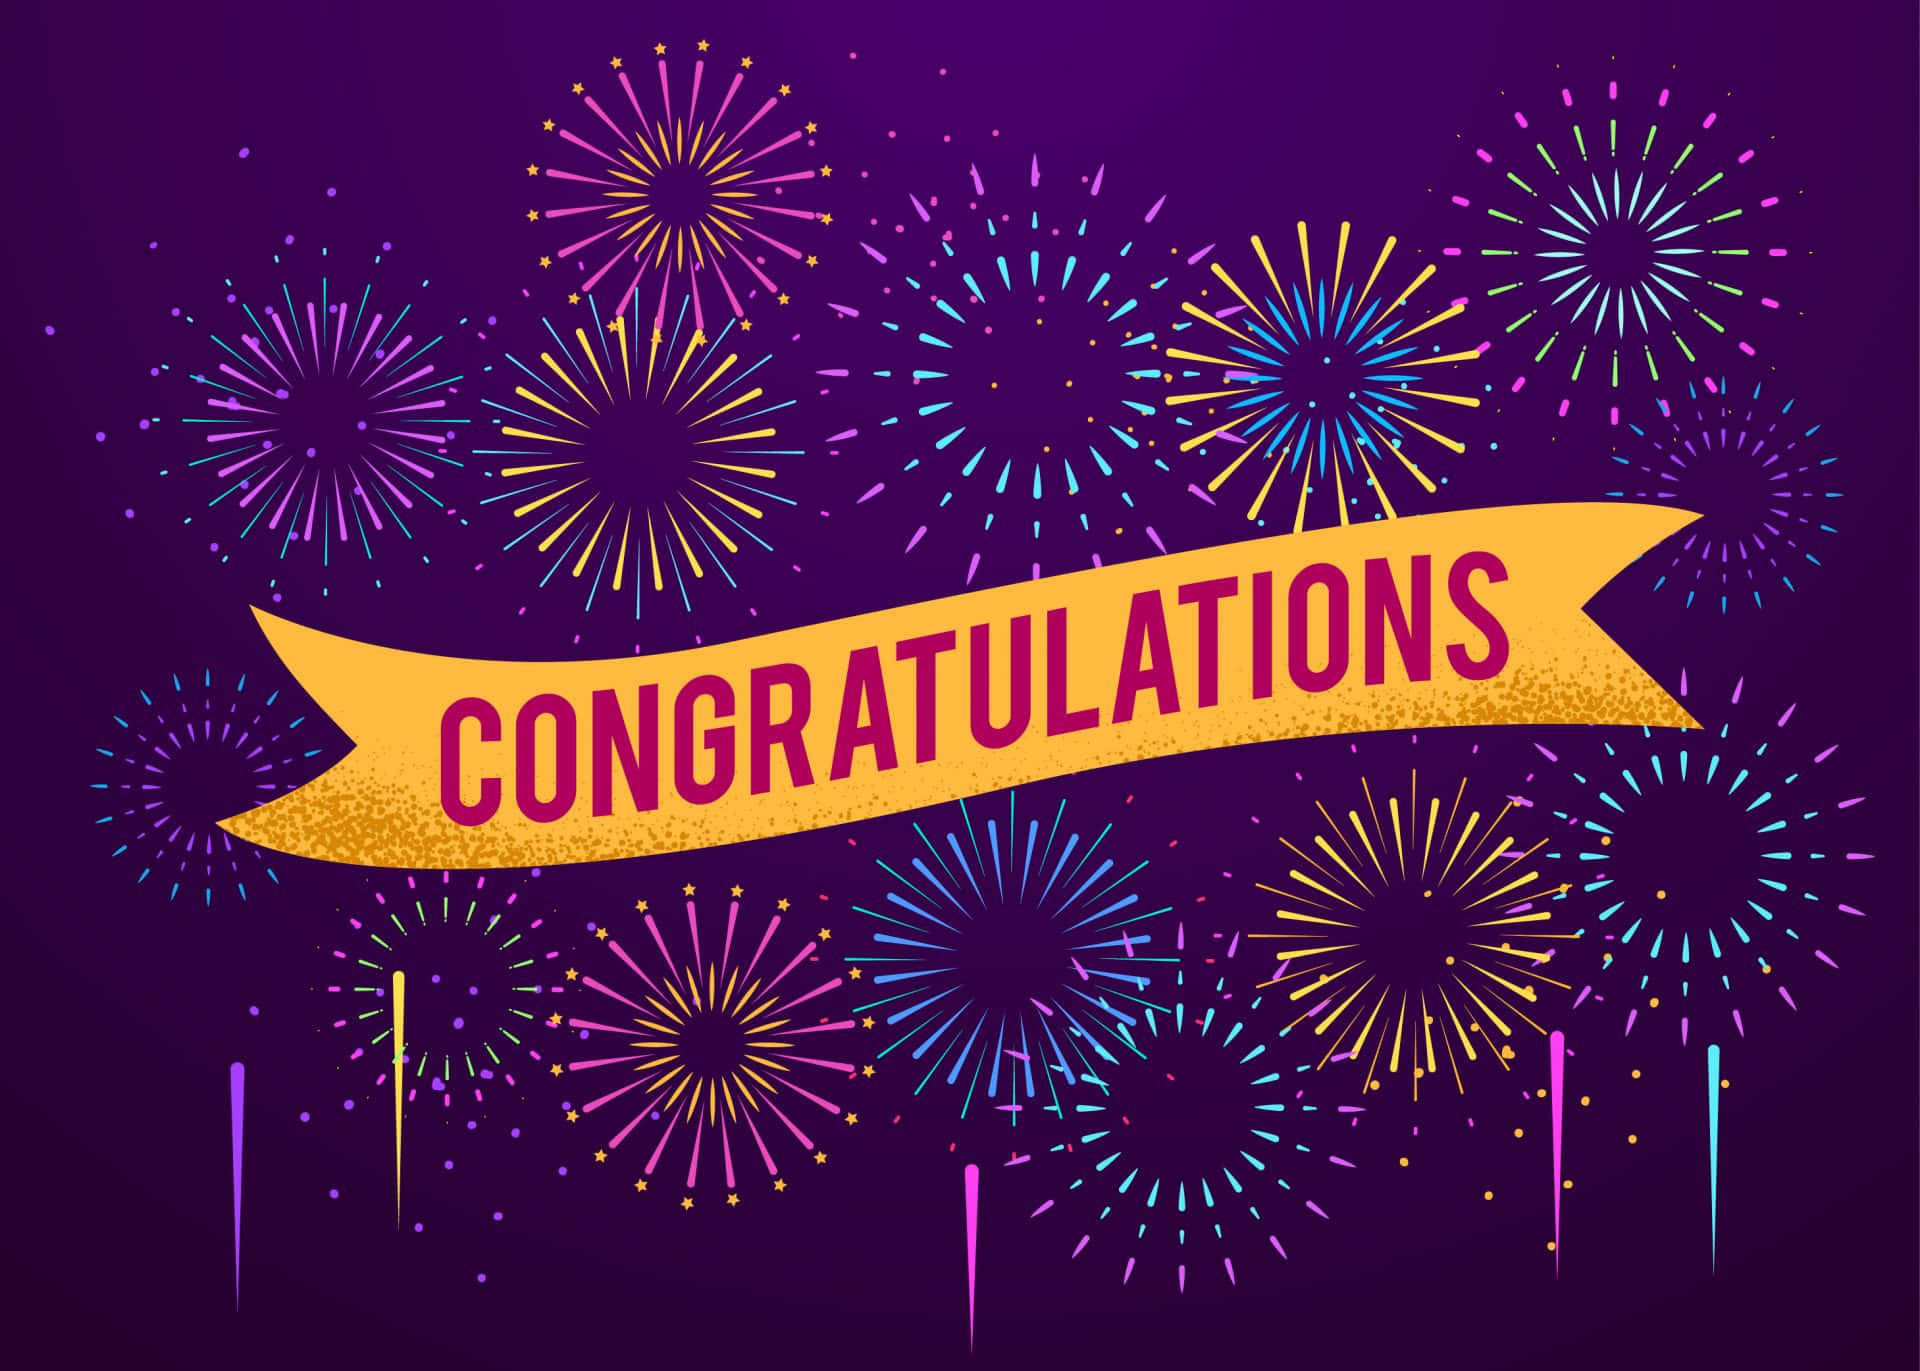 Congratulations Banner With Fireworks On Purple Background